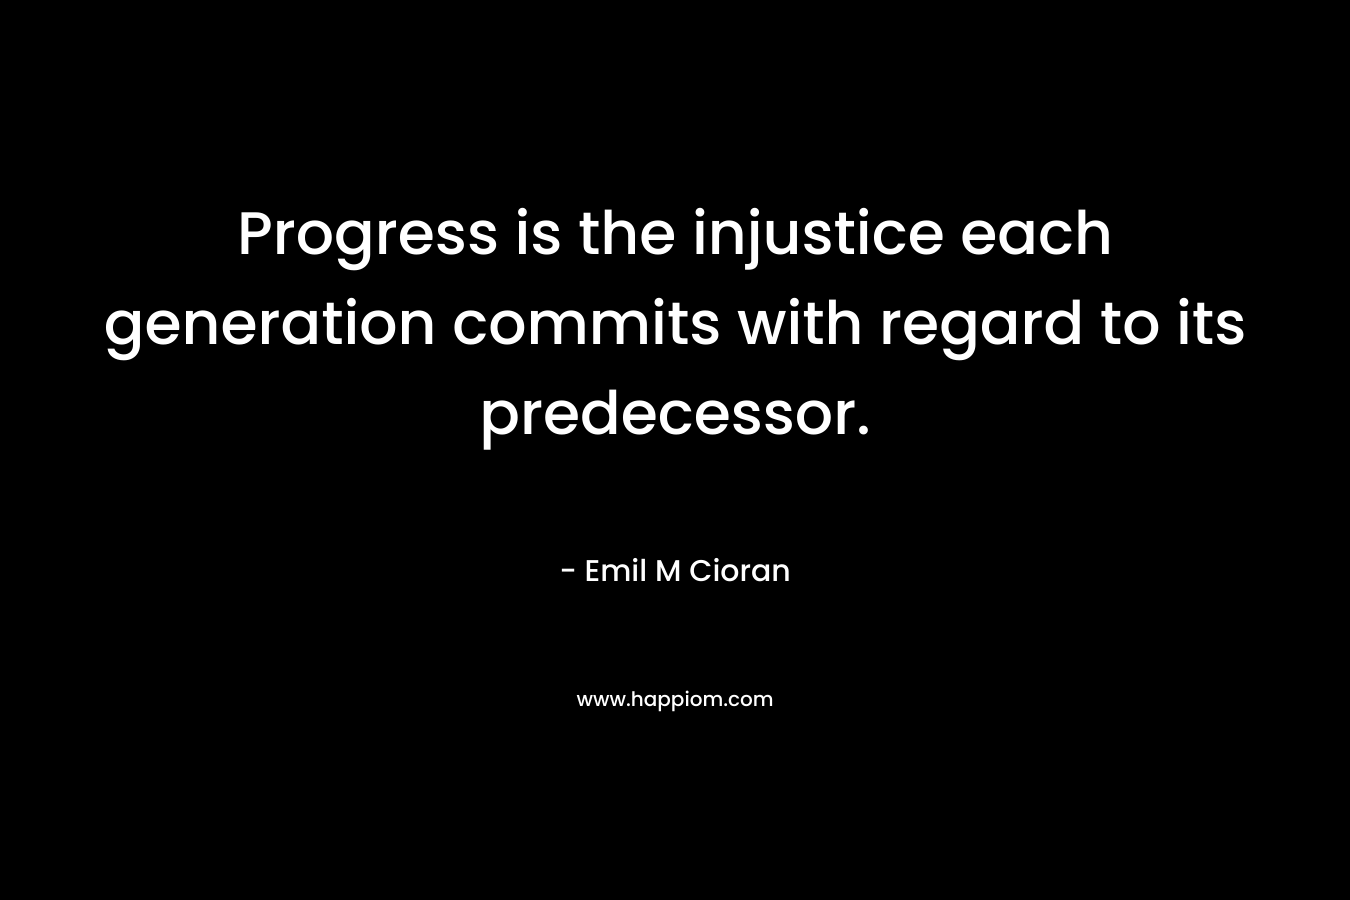 Progress is the injustice each generation commits with regard to its predecessor. – Emil M Cioran